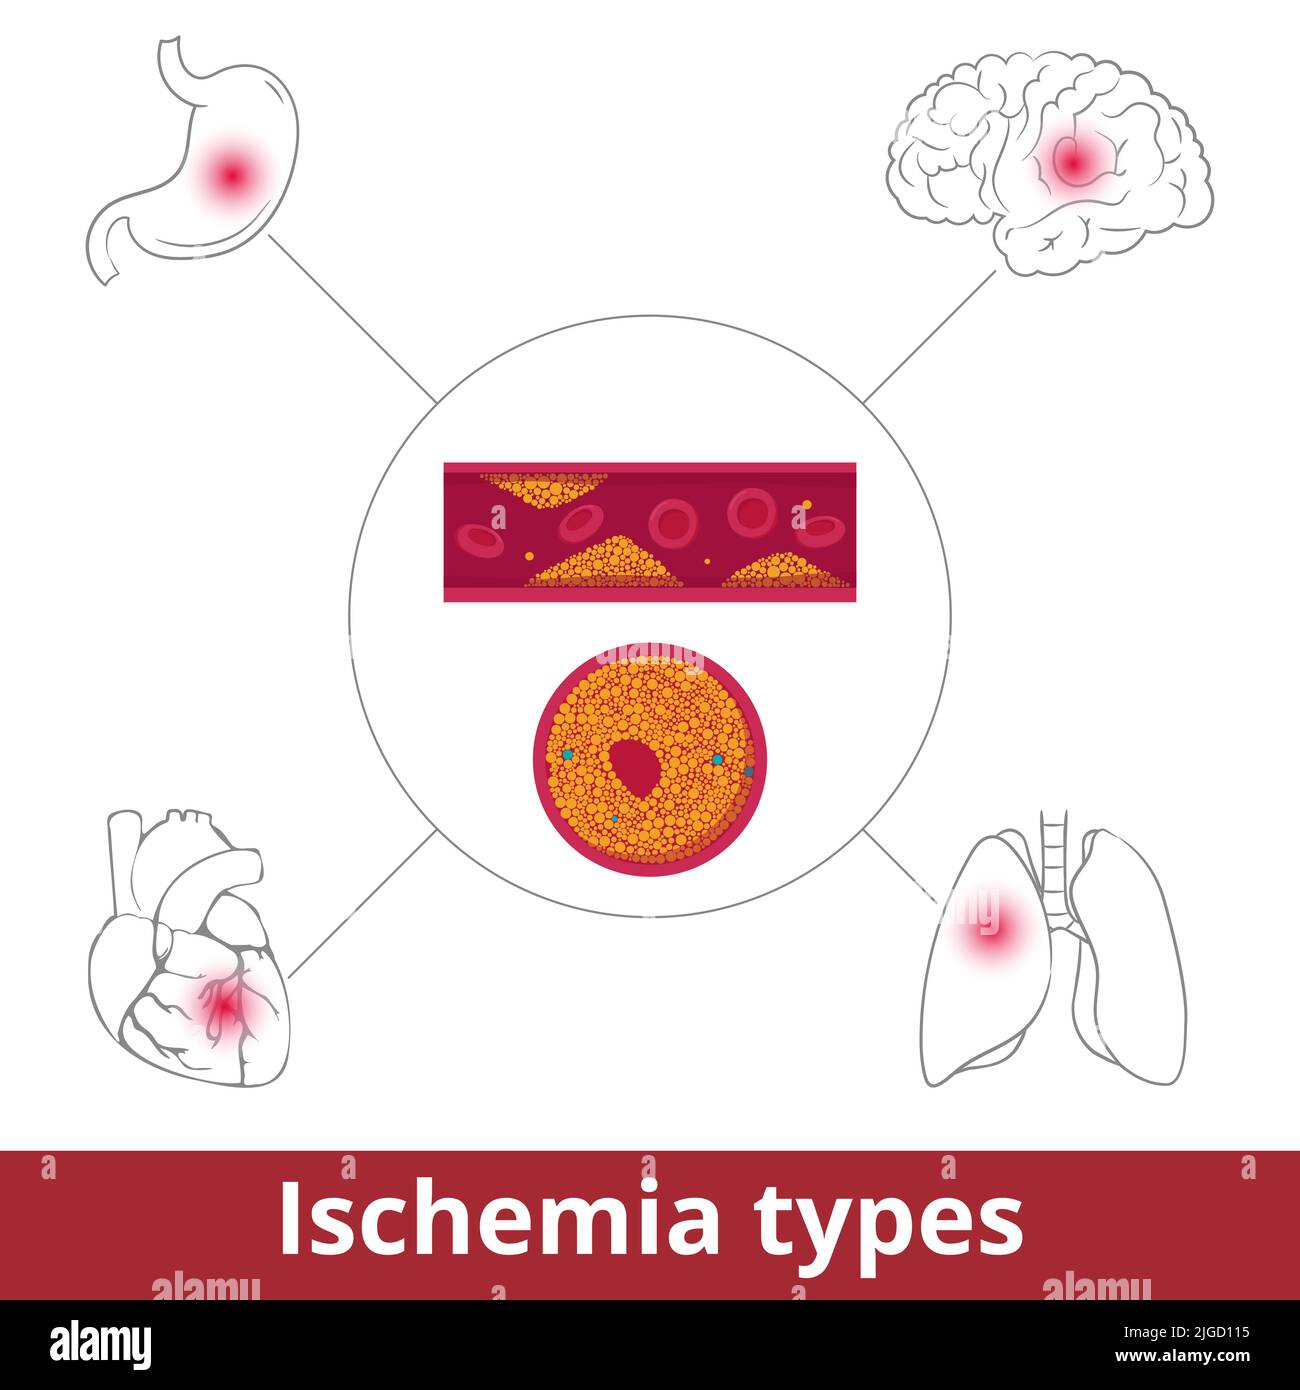 Ischemia types. Visualization of restriction in blood supply caused by problems with blood vessels due to vasoconstriction, thrombosis, or embolism. Stock Vector